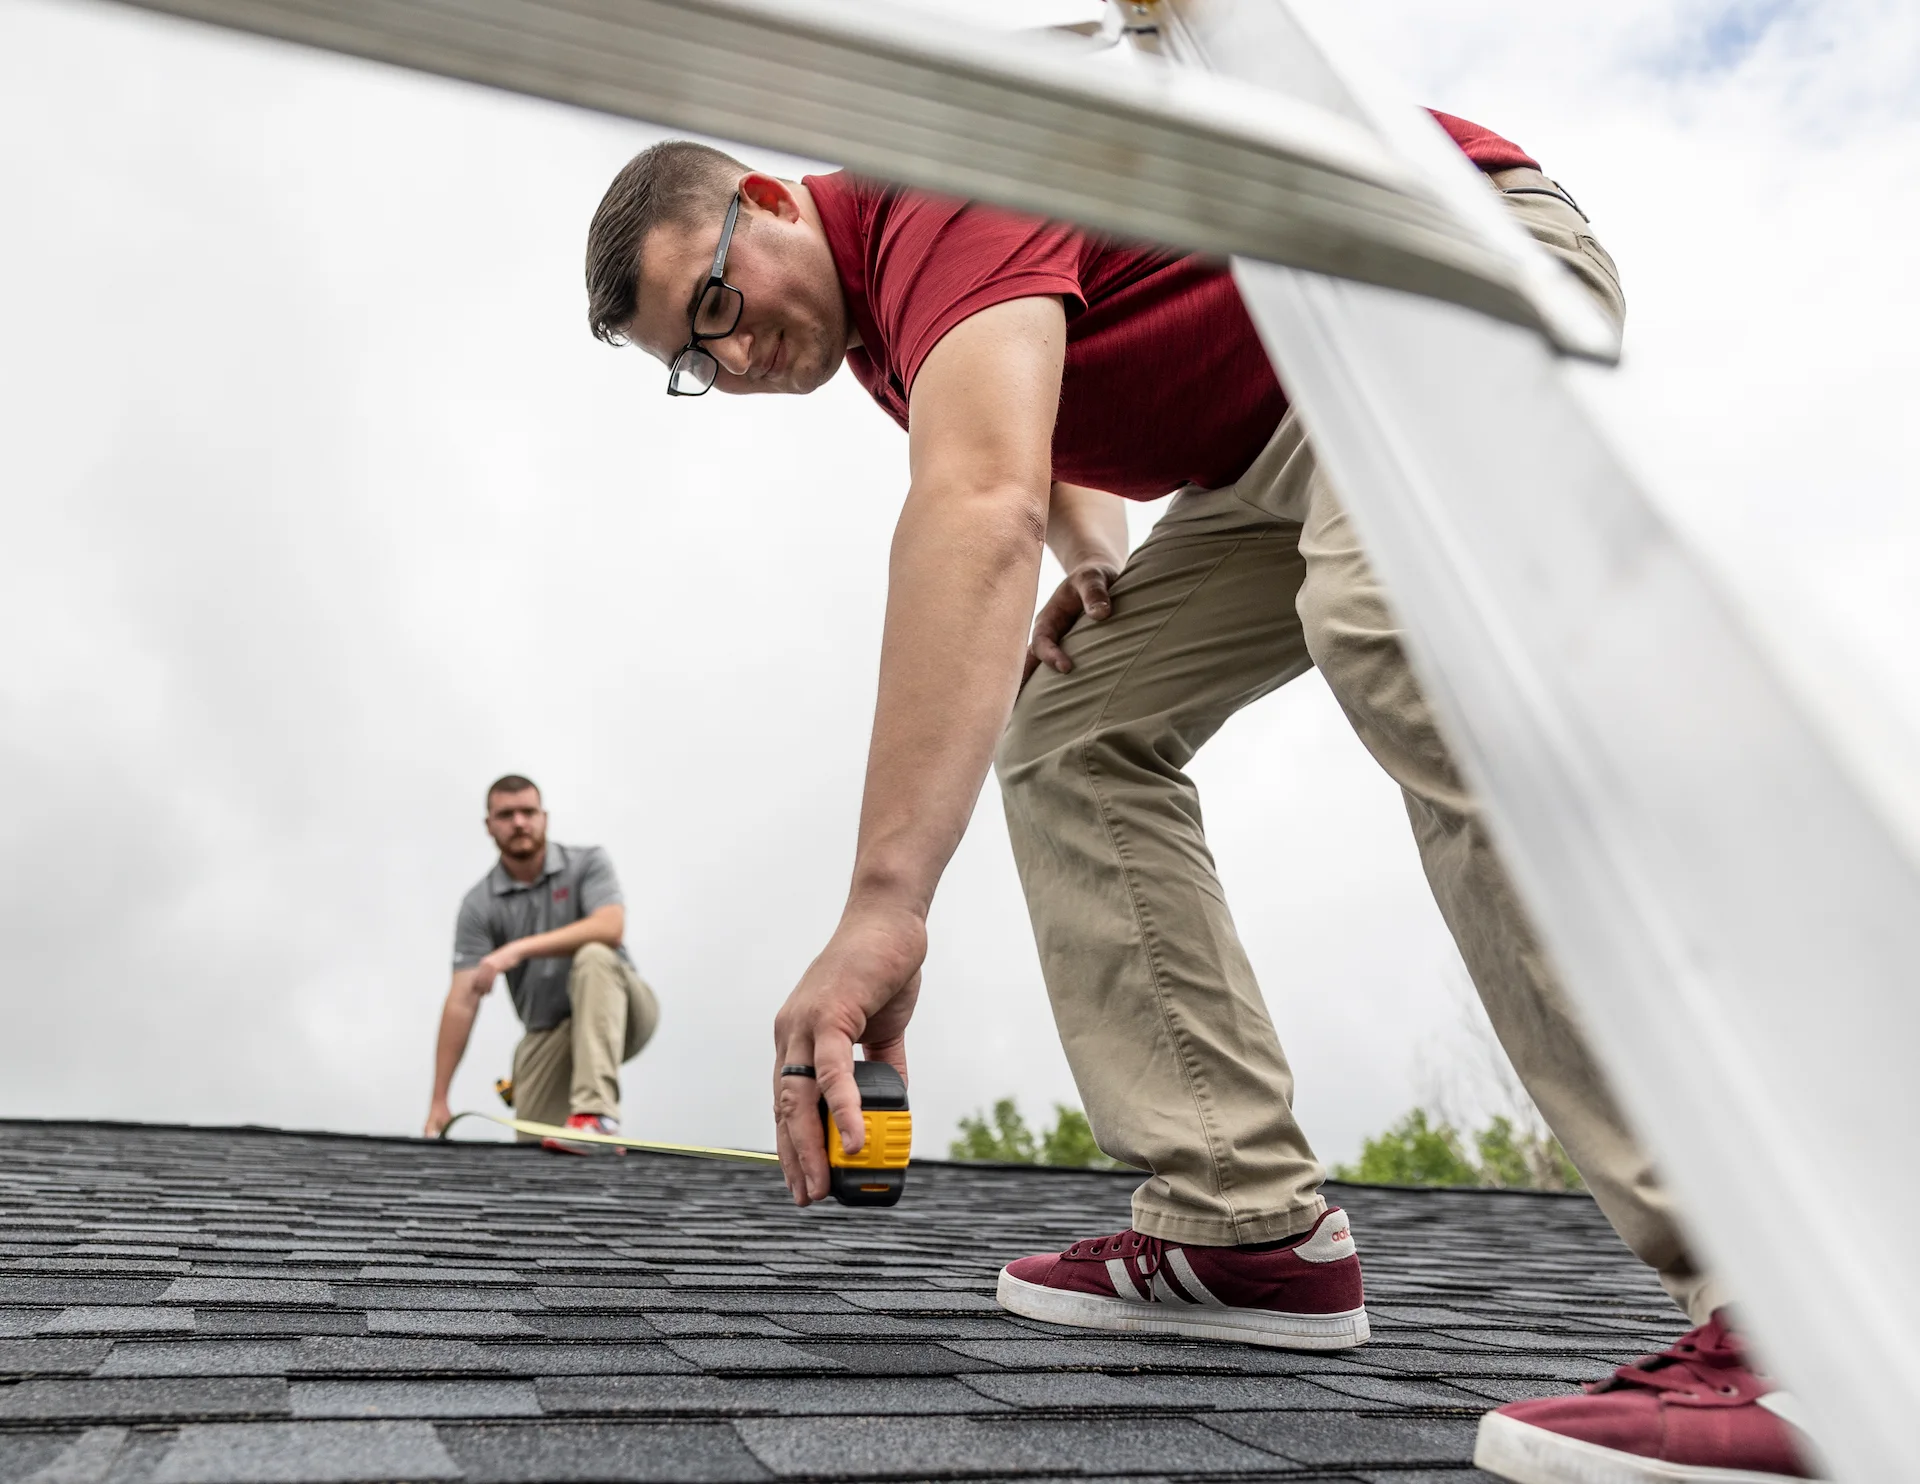 h&f employee working on a roof